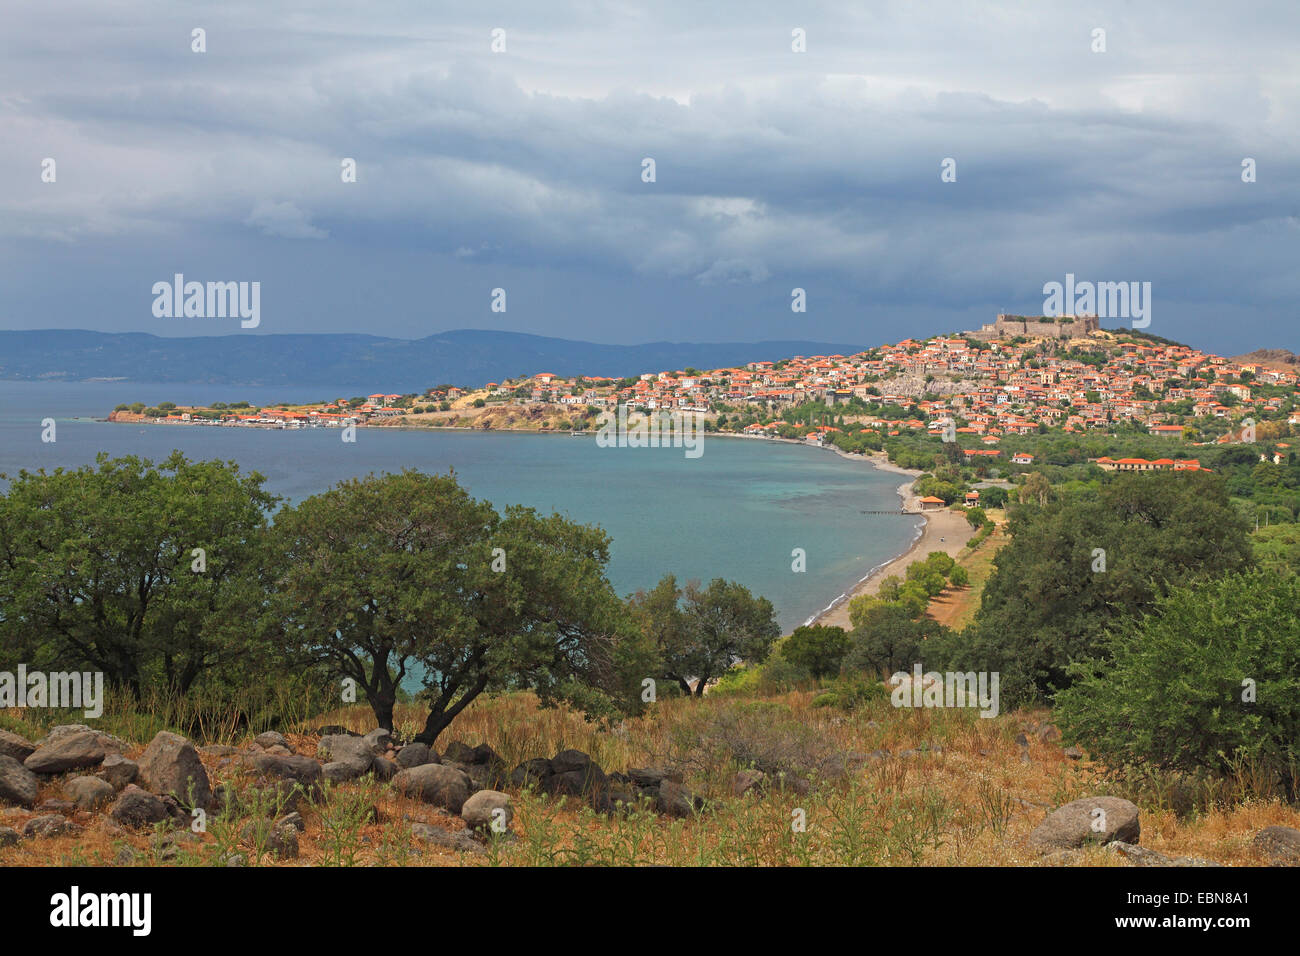 view at Molyvos while rain clouds are gathering, Greece, Lesbos Stock Photo